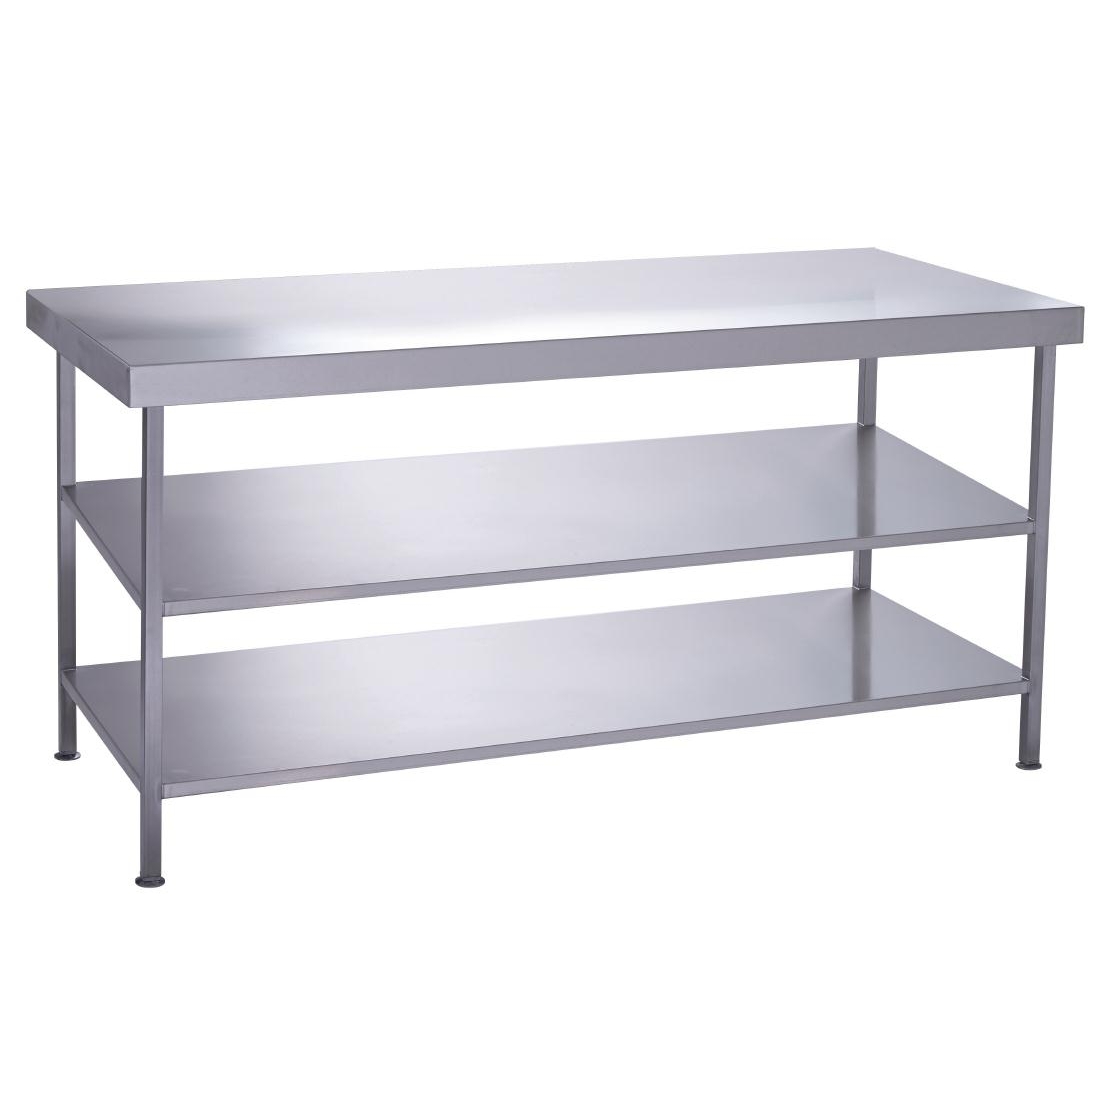 Parry Fully Welded Stainless Steel Centre Table 2 Undershelves 1200x600mm